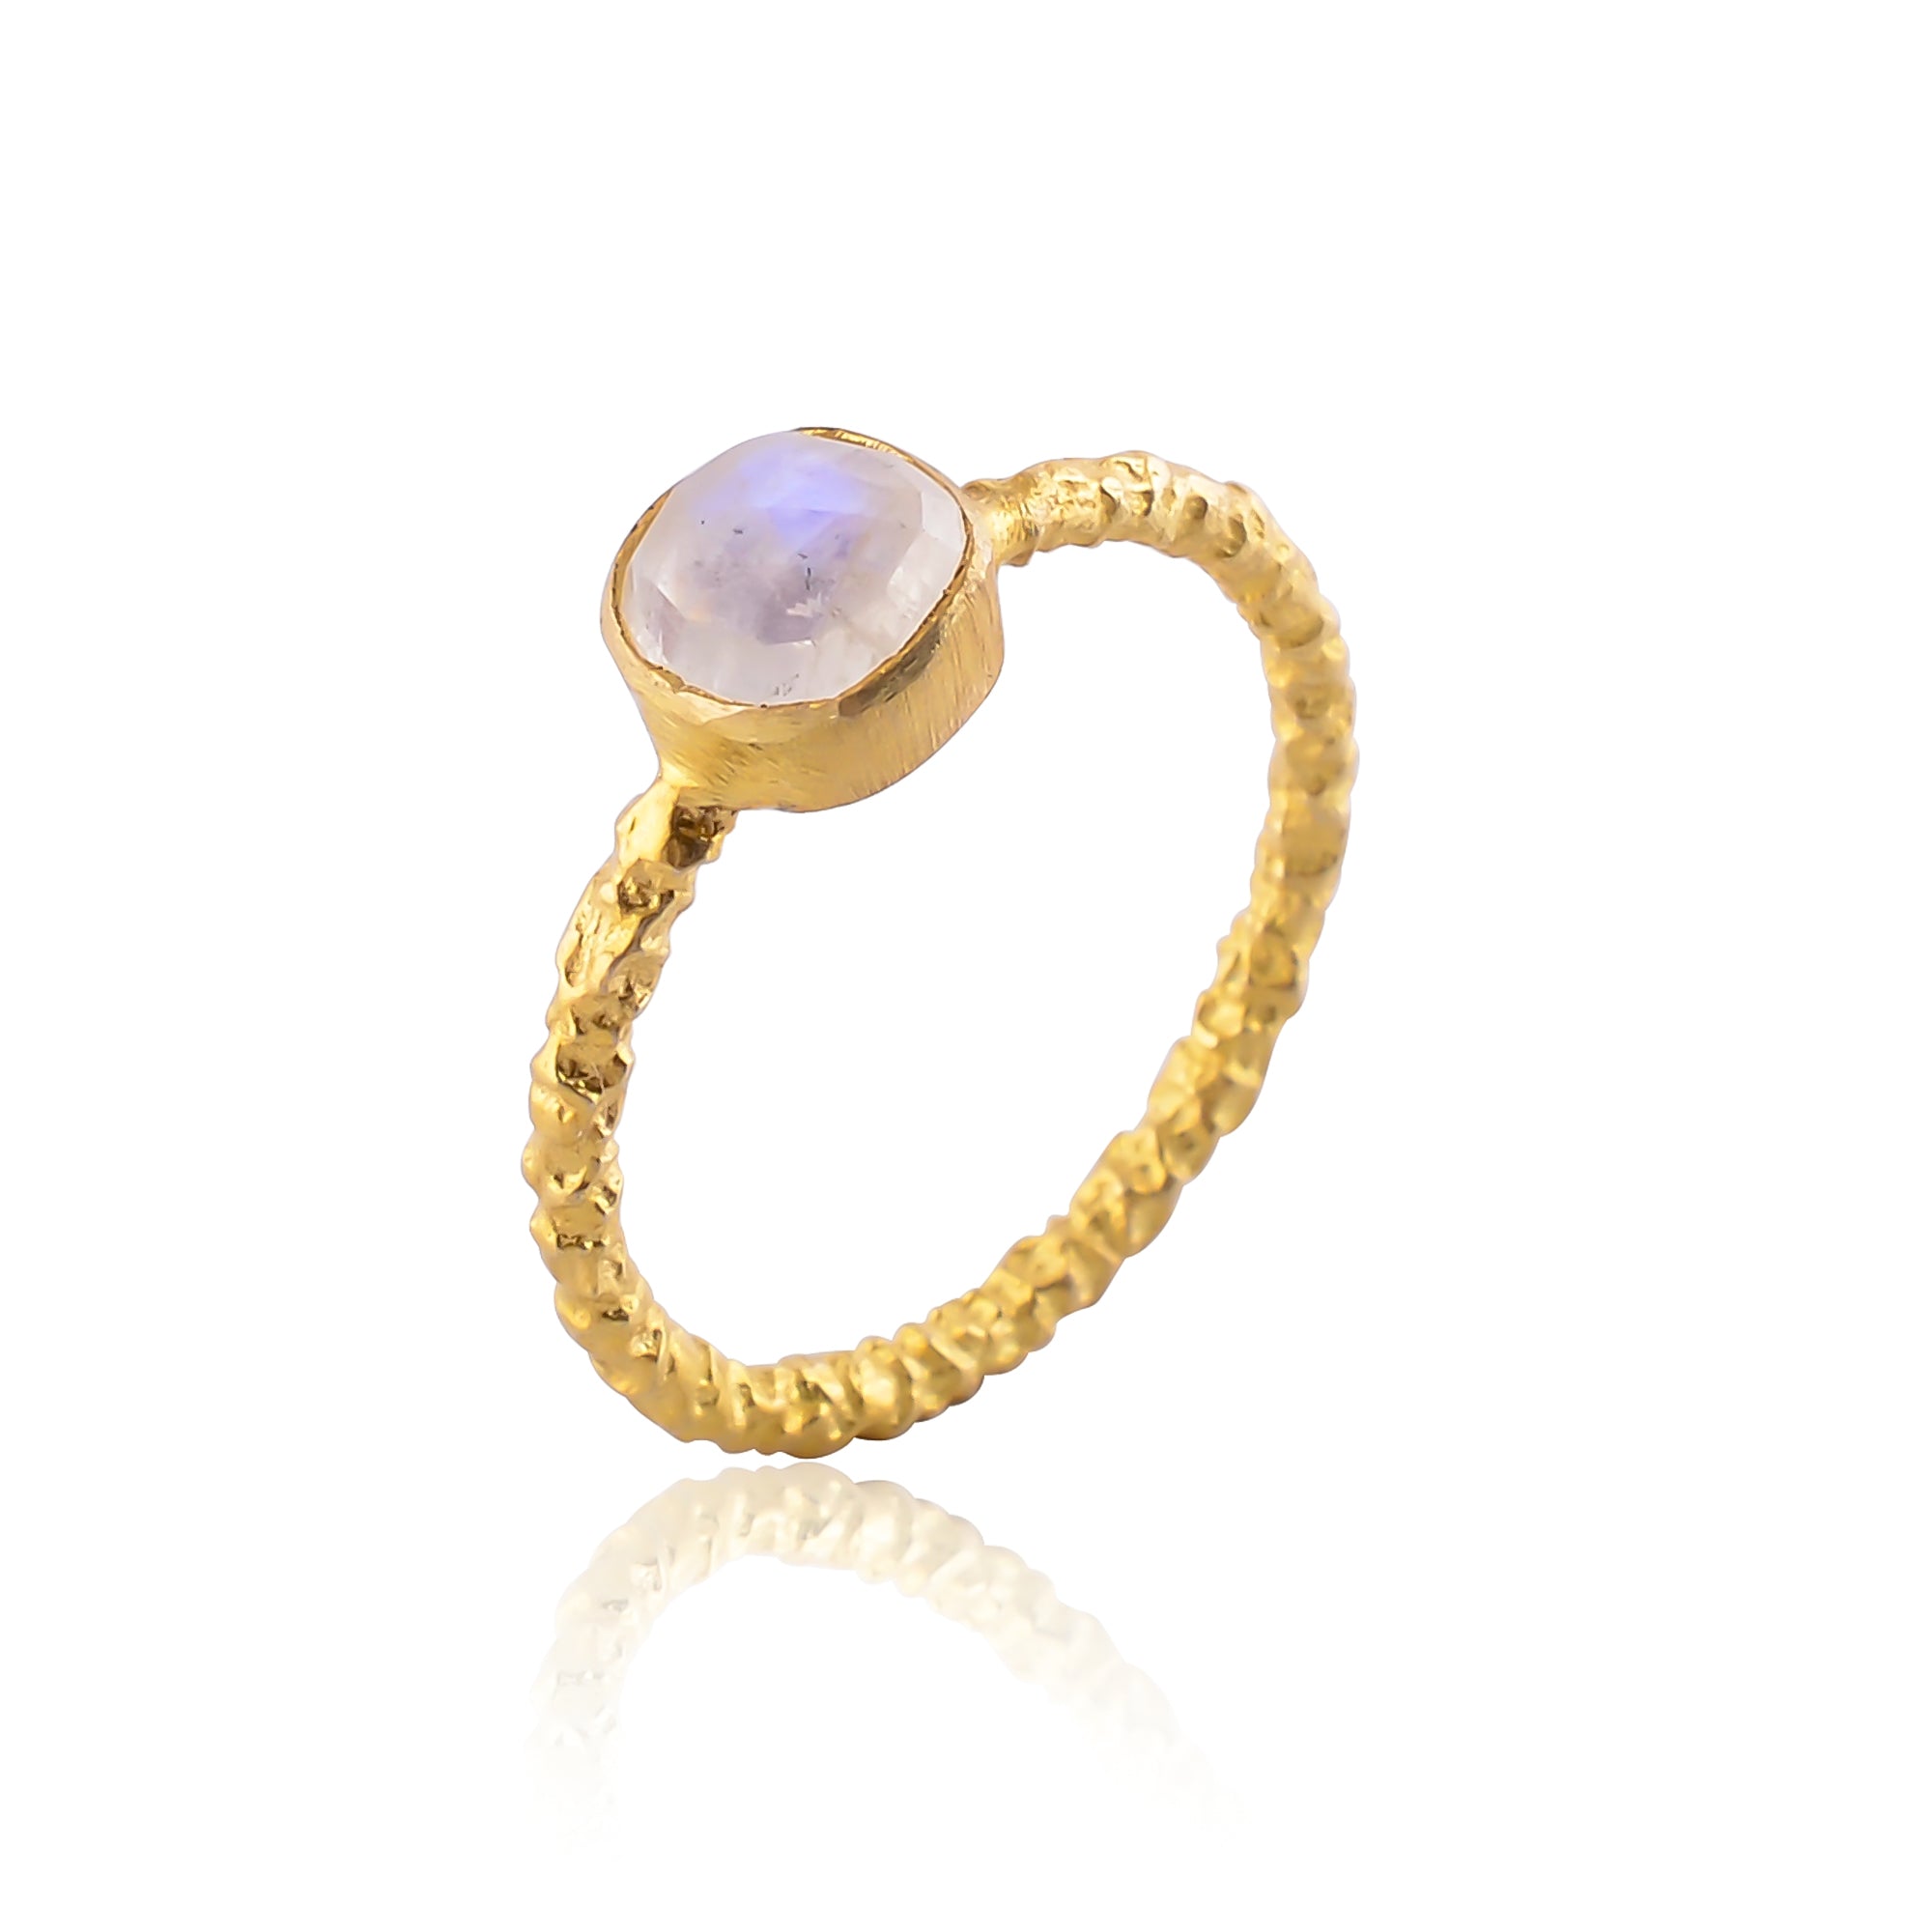 Buy Handcrafted Silver Gold Plated Rainbow Moonstone Ring